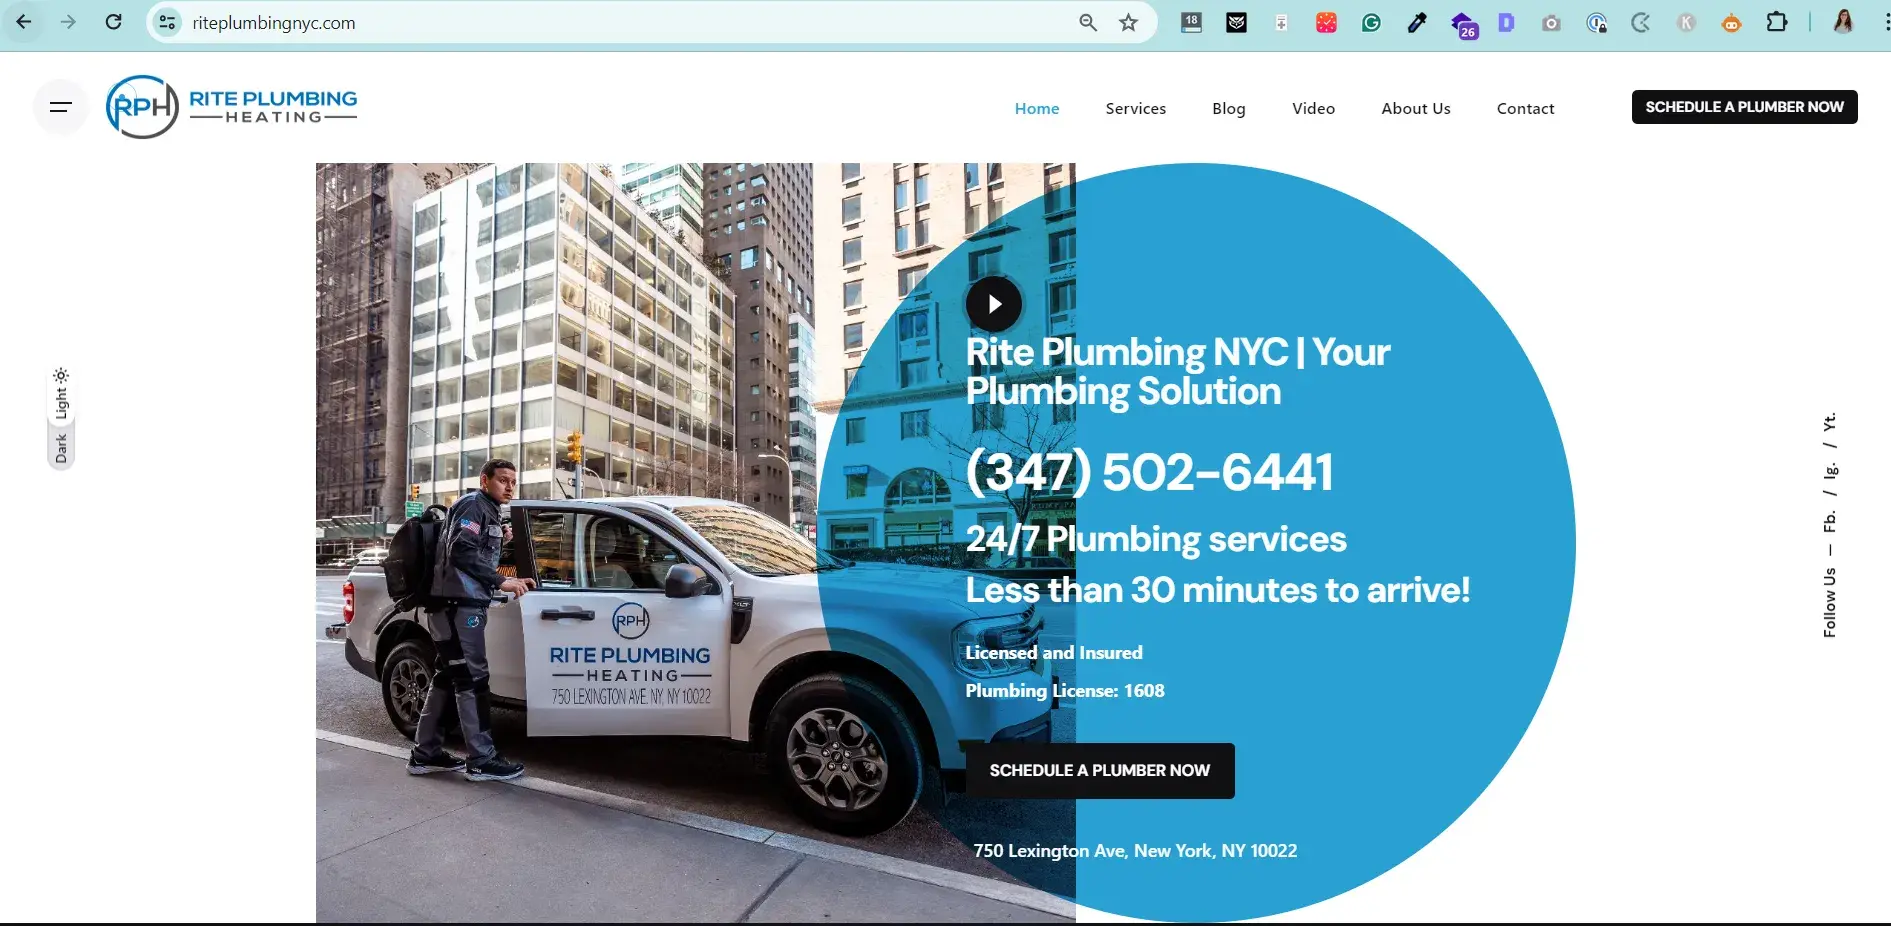 Rite Plumbing use a local domain which is the best domain for them because they only serve New York. Screenshot shows the domain name and their homepage above the fold.